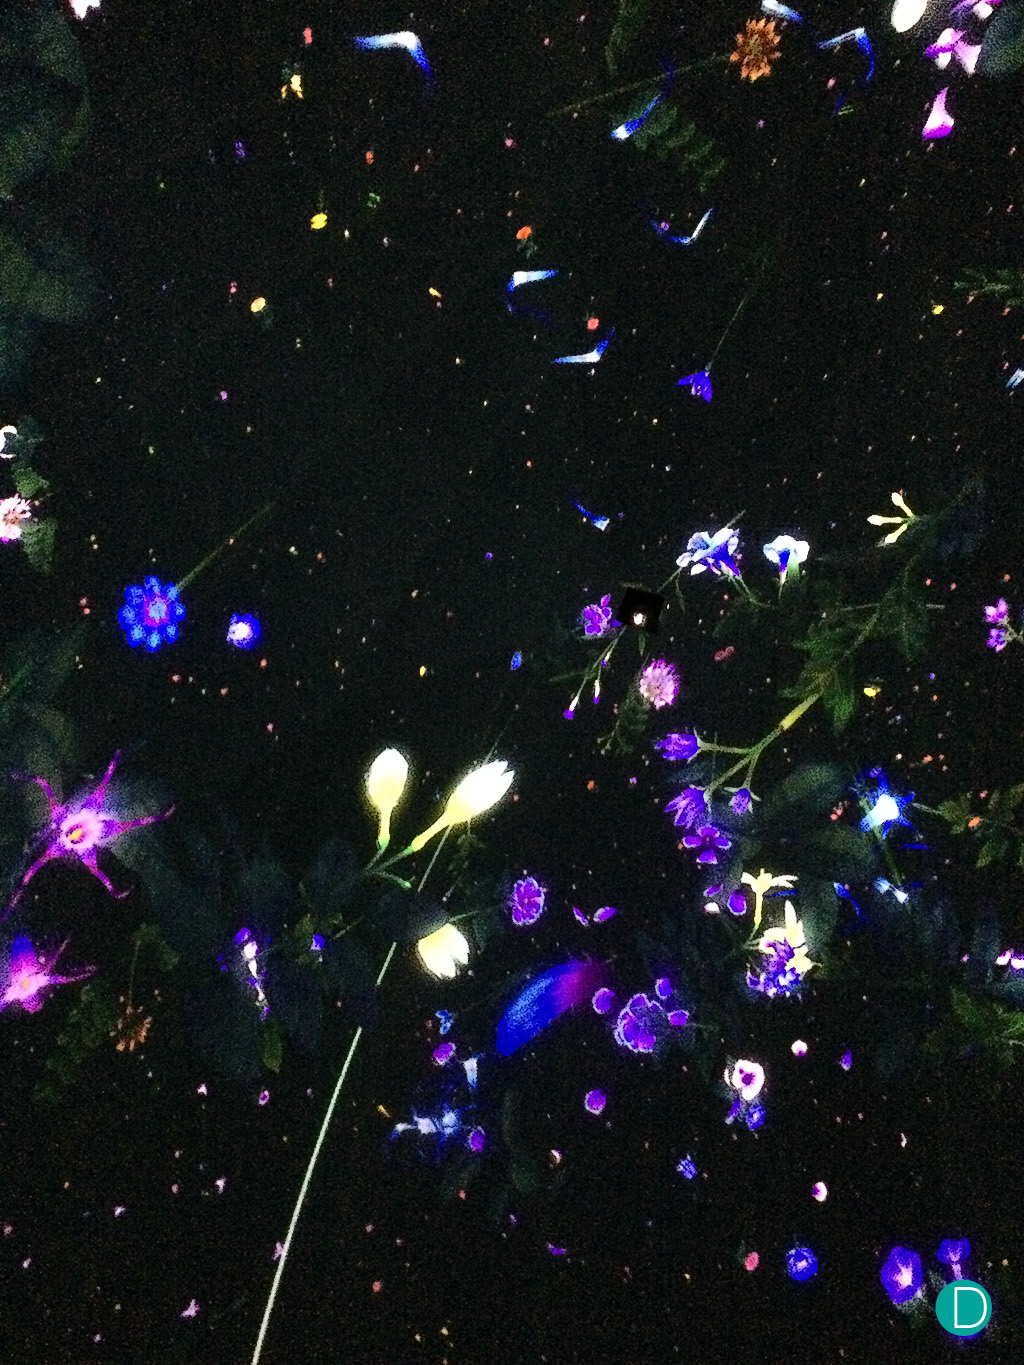 The cascading constellation of flora from the top of the Glass Rotunda. The effect is quite mesmerising.